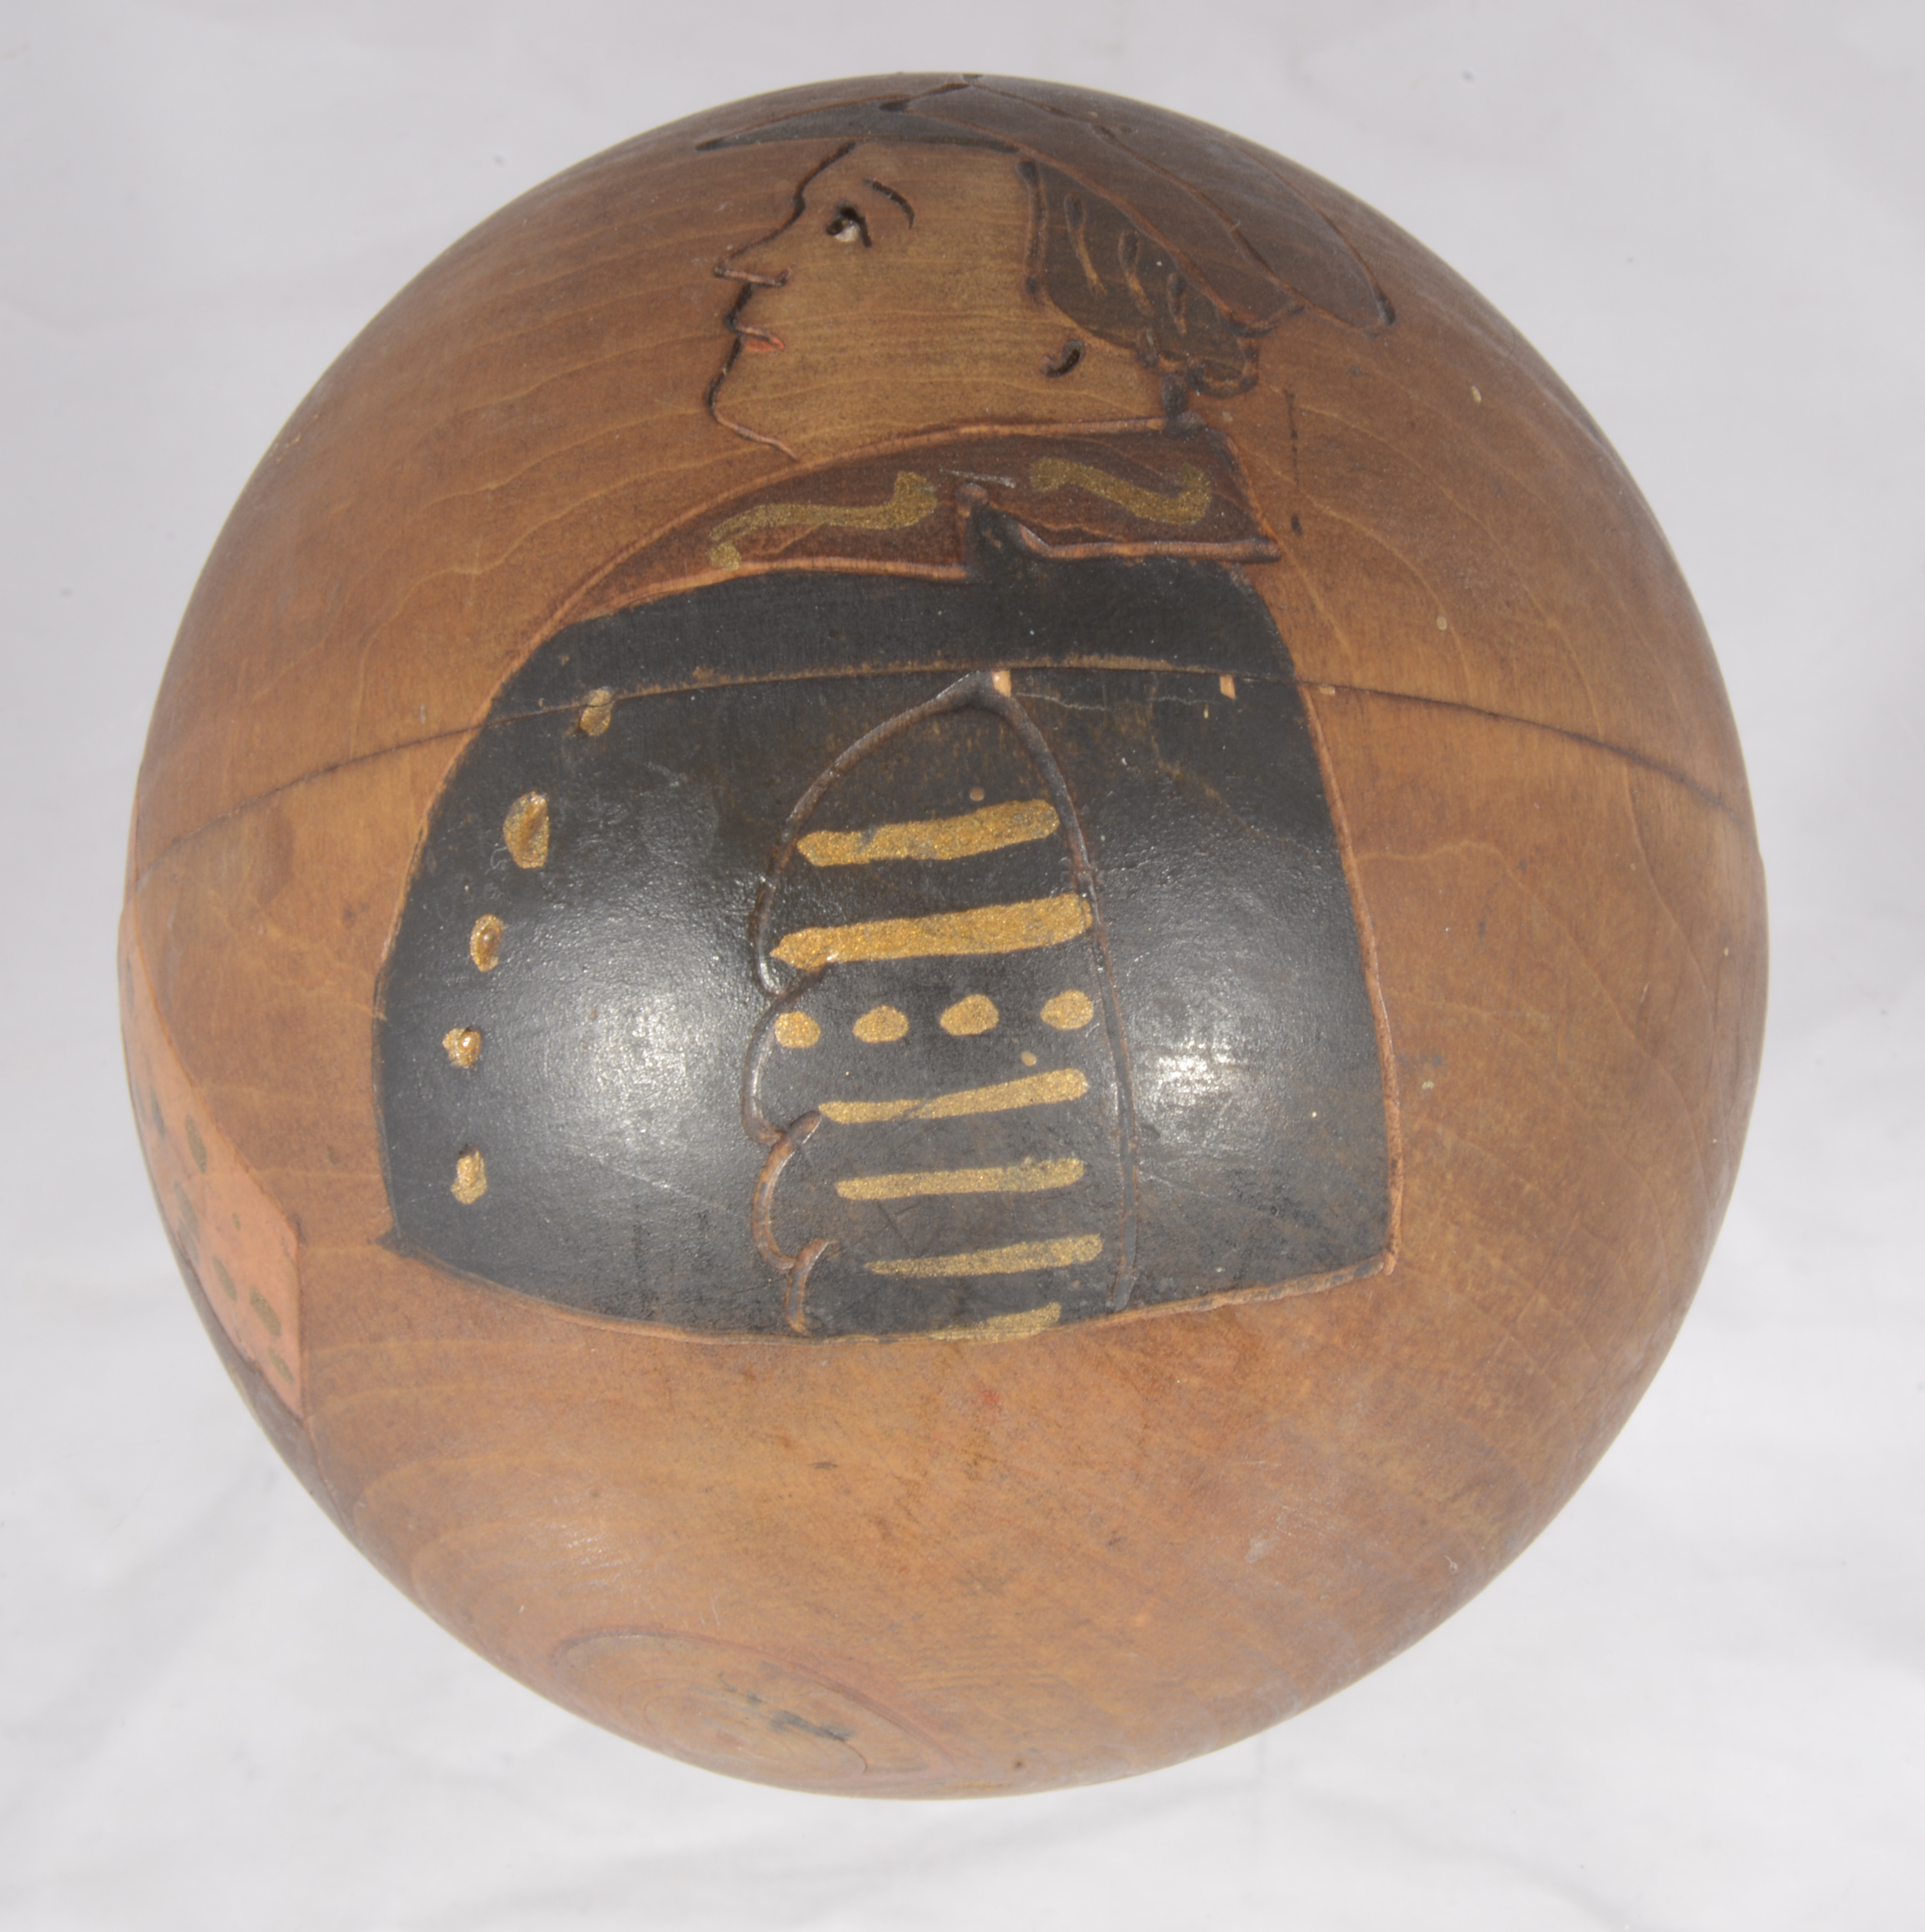 A hand decorated Russian (?) wooden ball, mid 20th century - Image 2 of 2